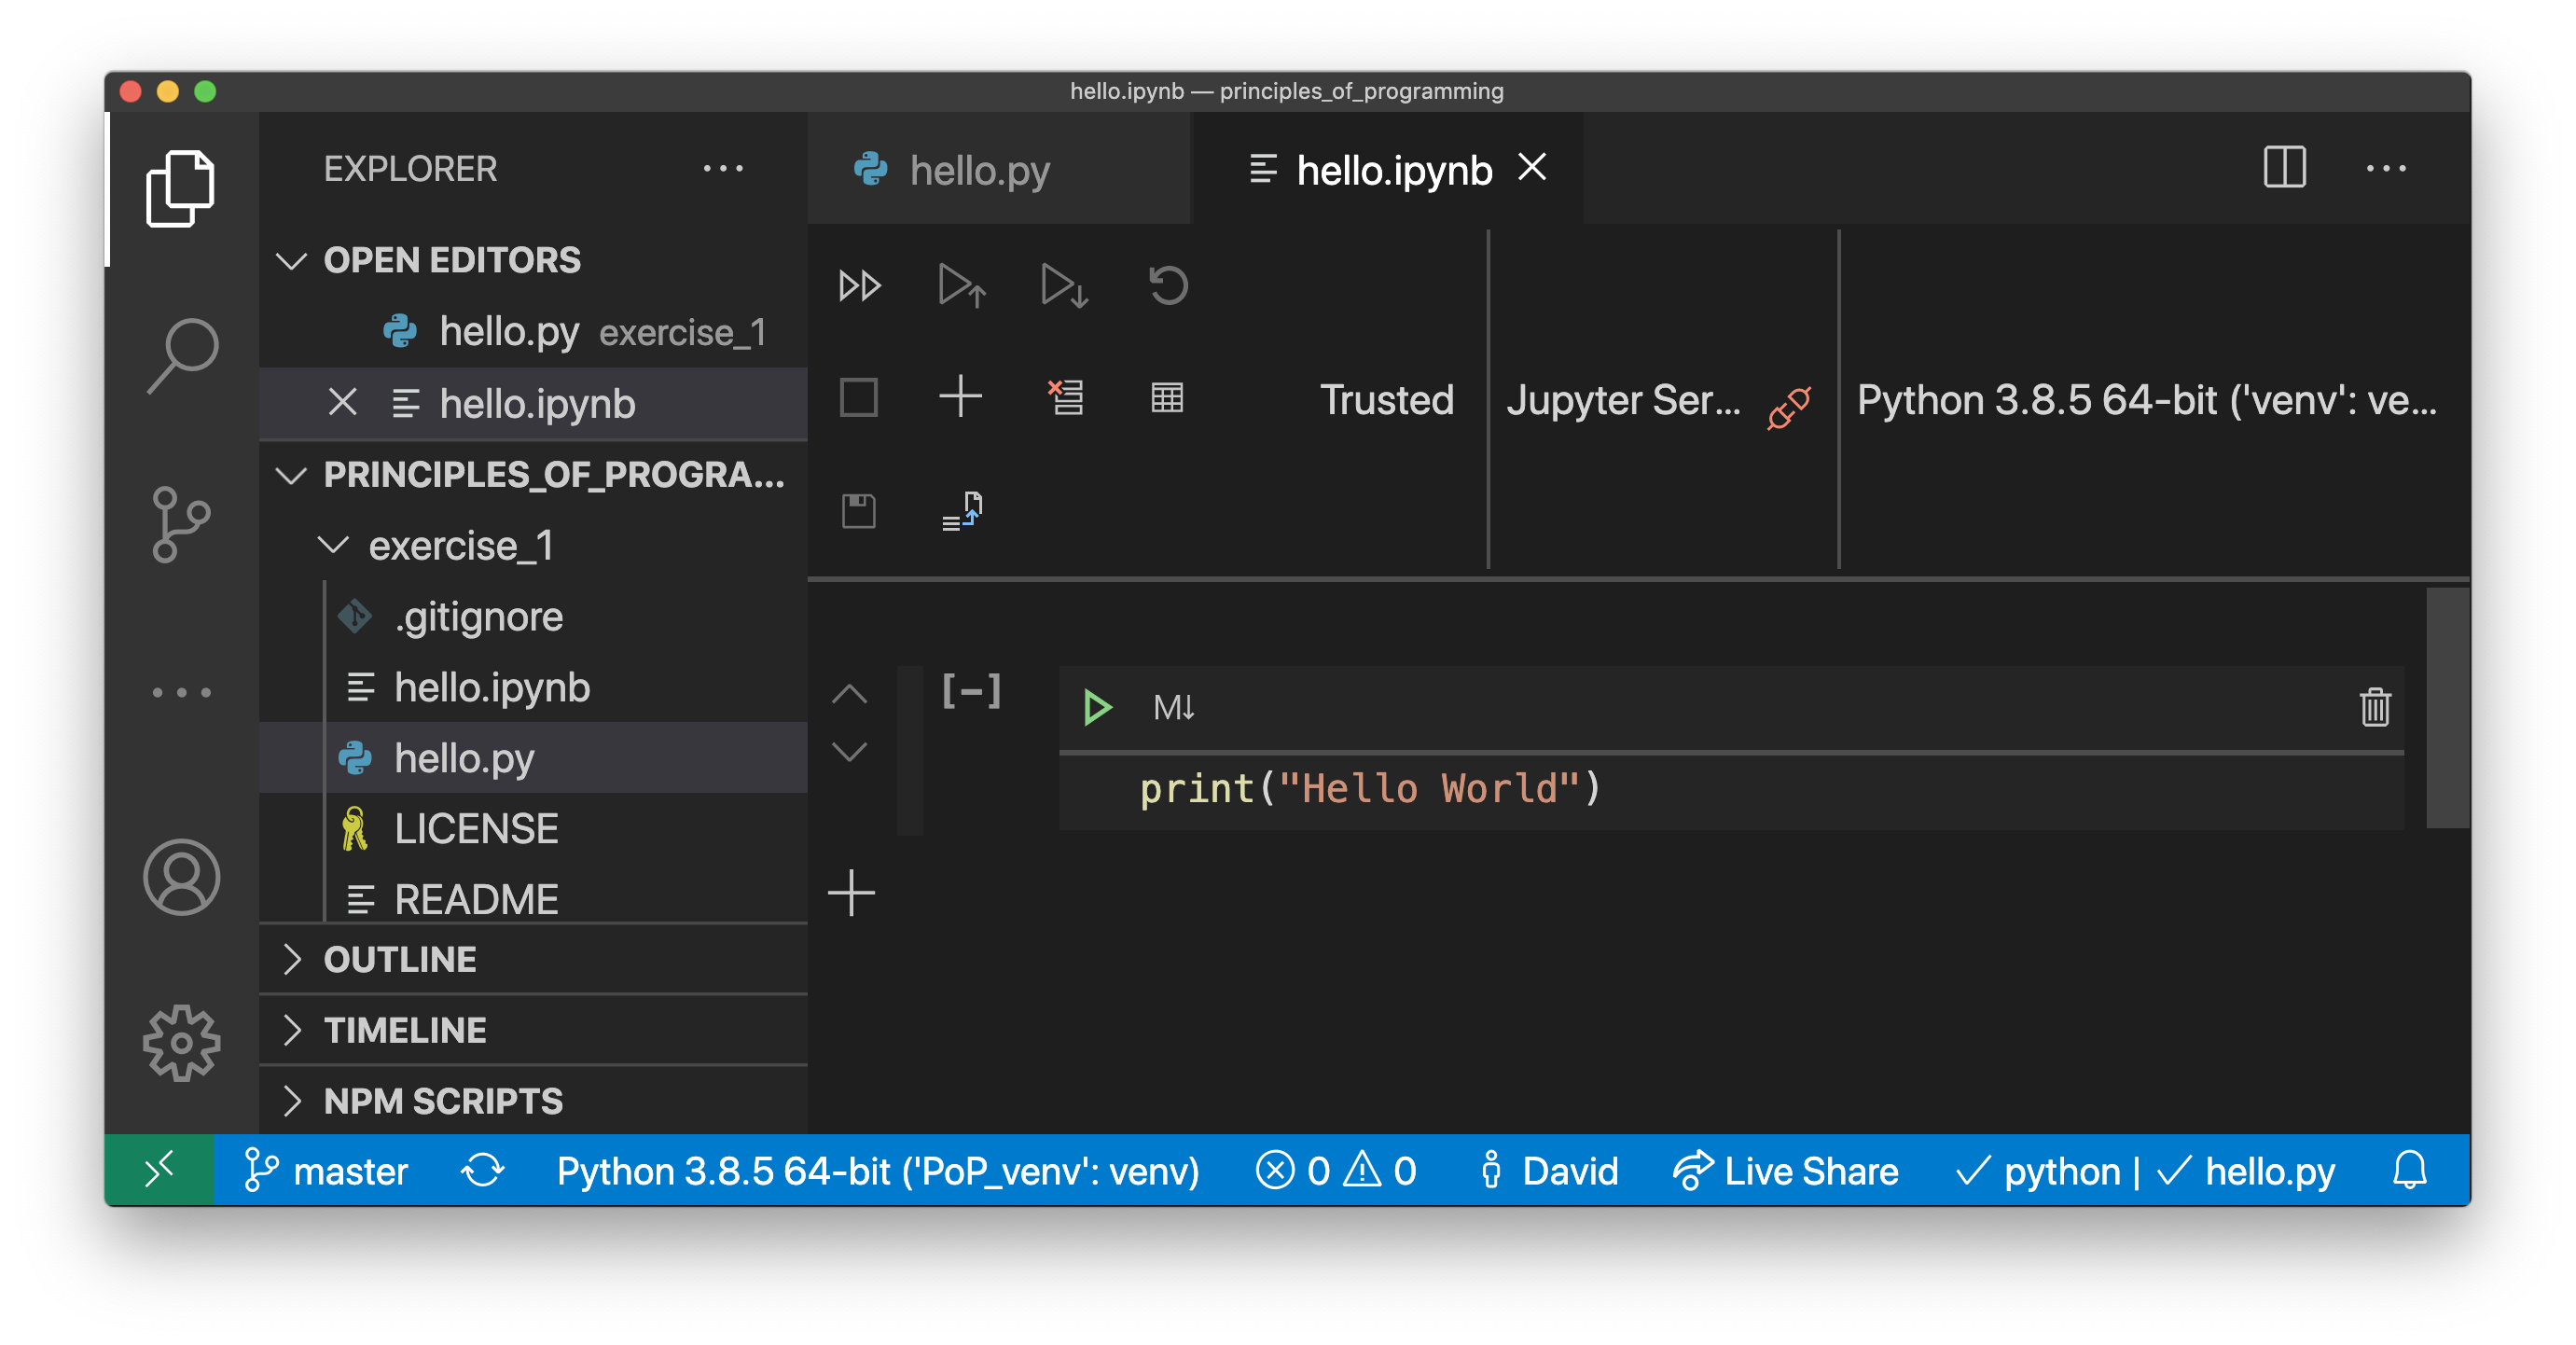 _images/vscode_hello_ipynb.png